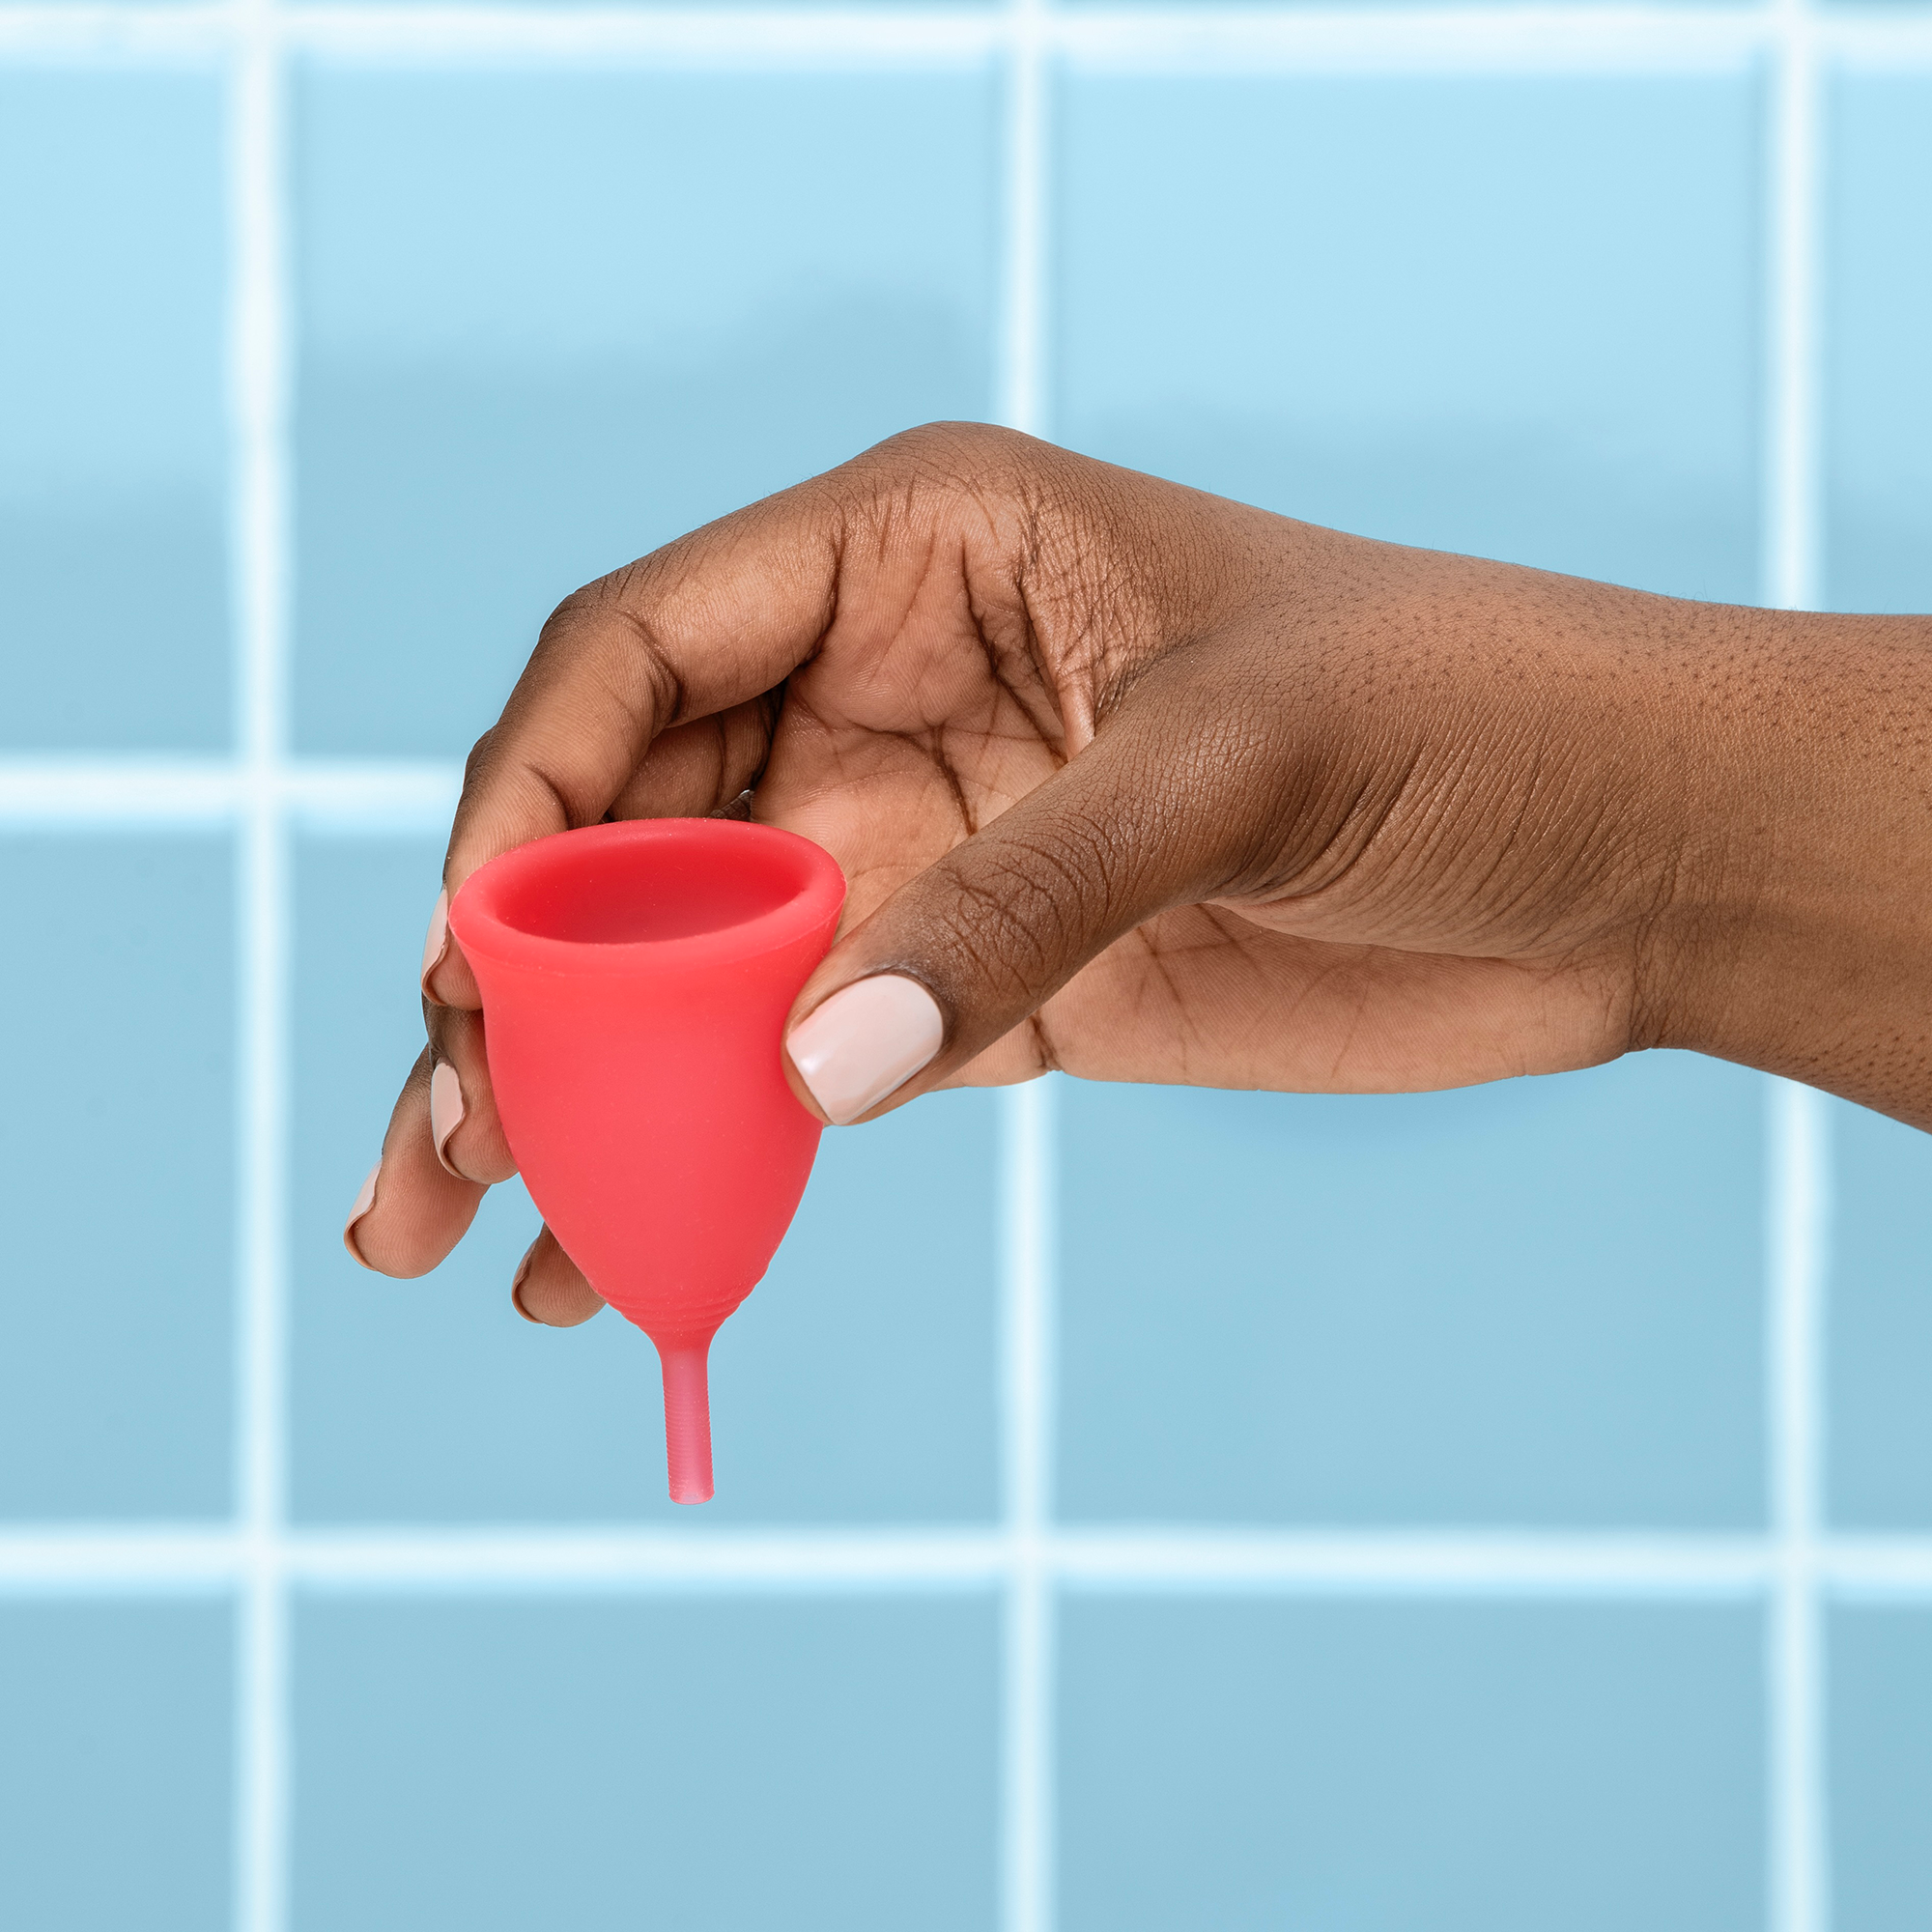 Menstrual cups: Why the recent increase in popularity?